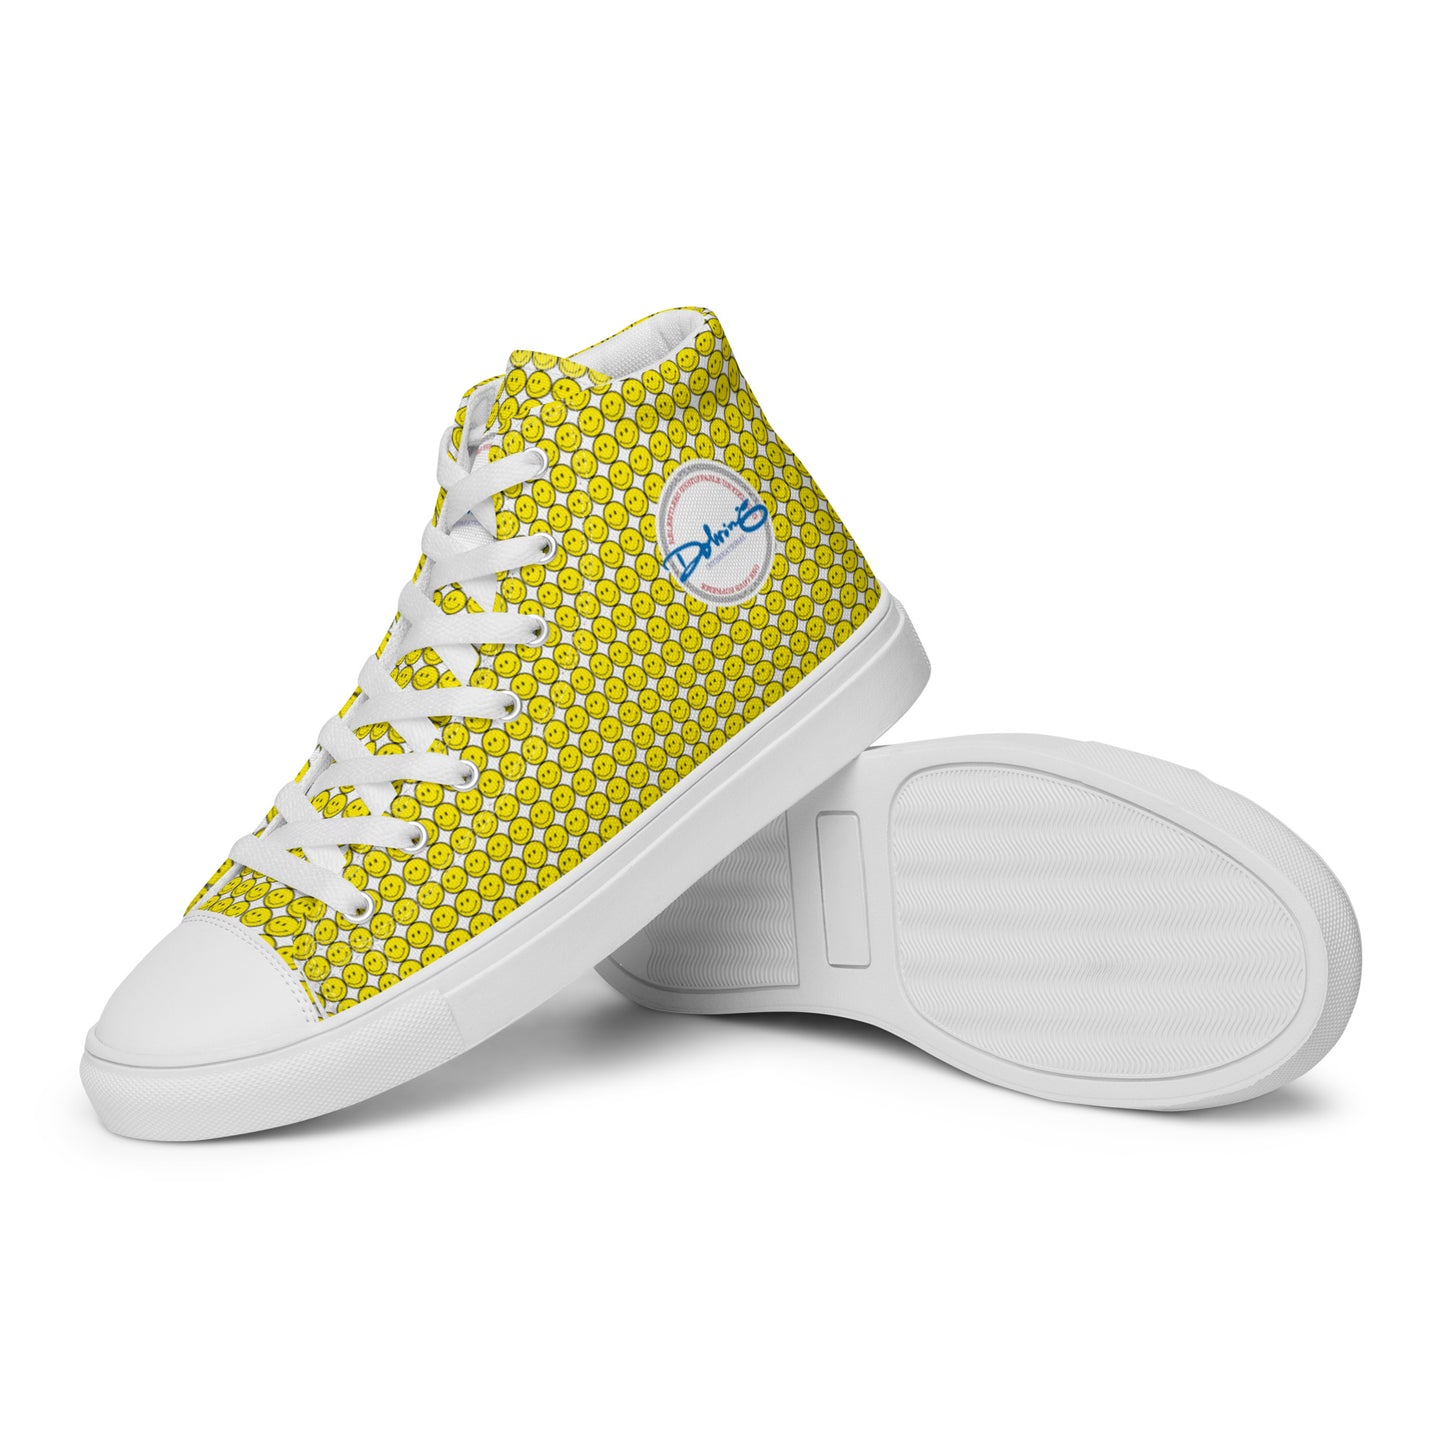 DEM SMILEYS by DOLVING - Women’s high top canvas shoes